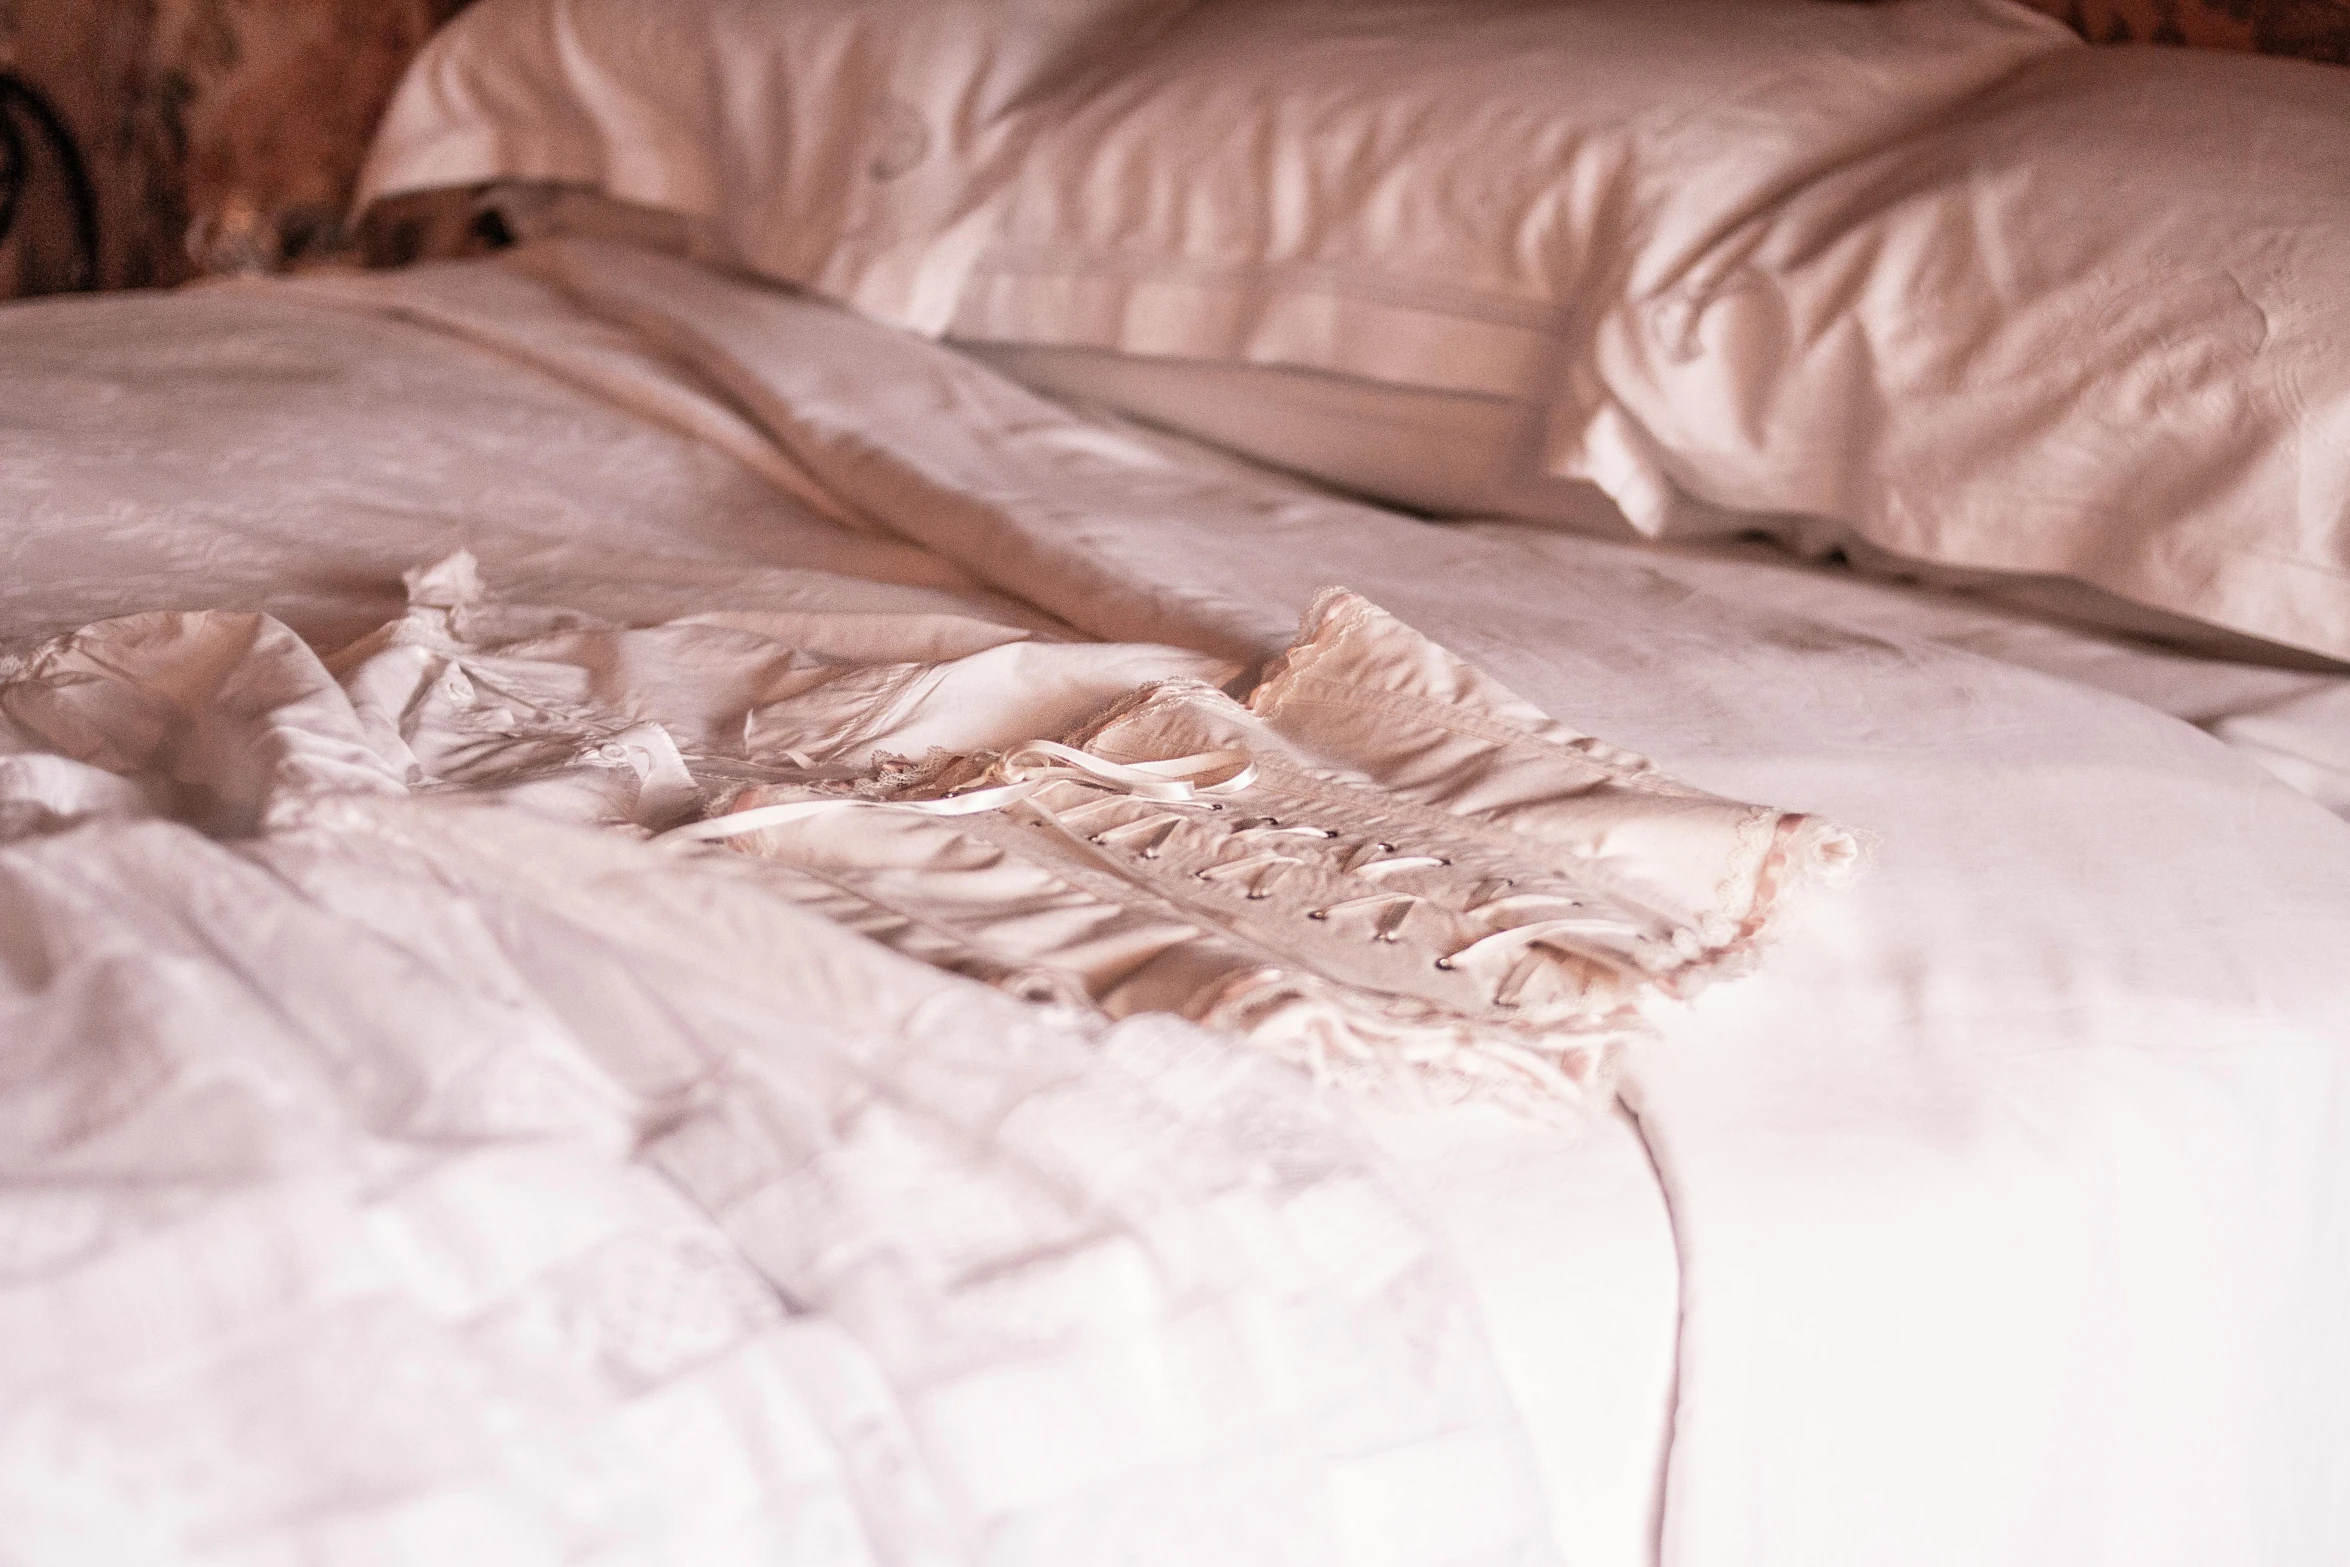 the bed is unmade with white sheets